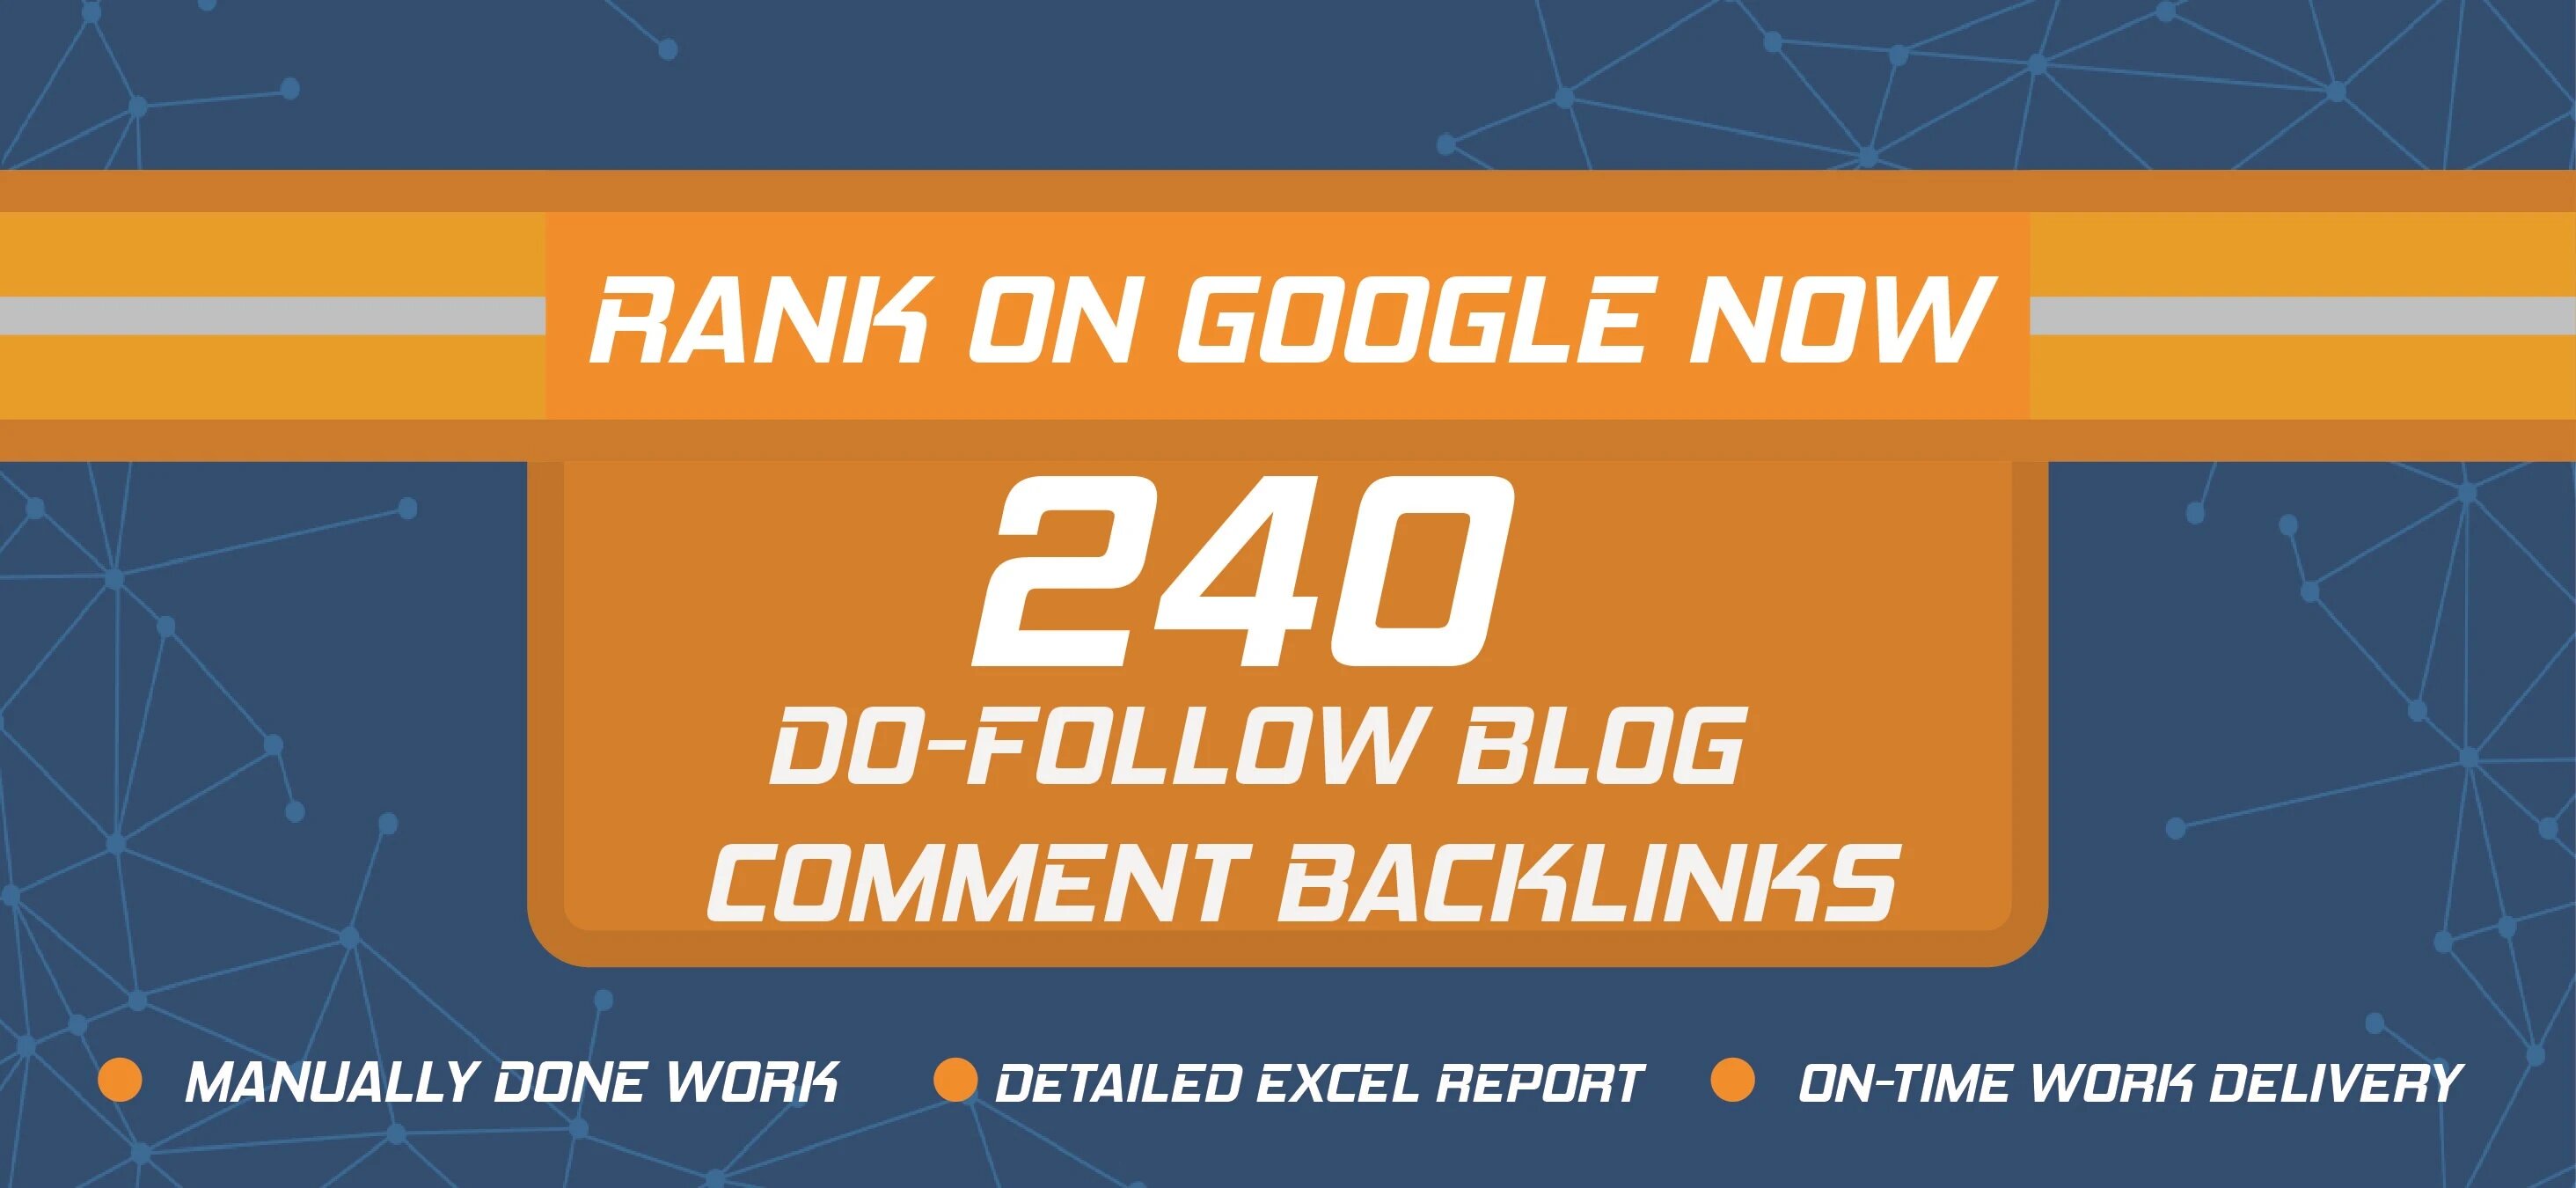 I will make 240 dofollow blog comments SEO backlinks high quality